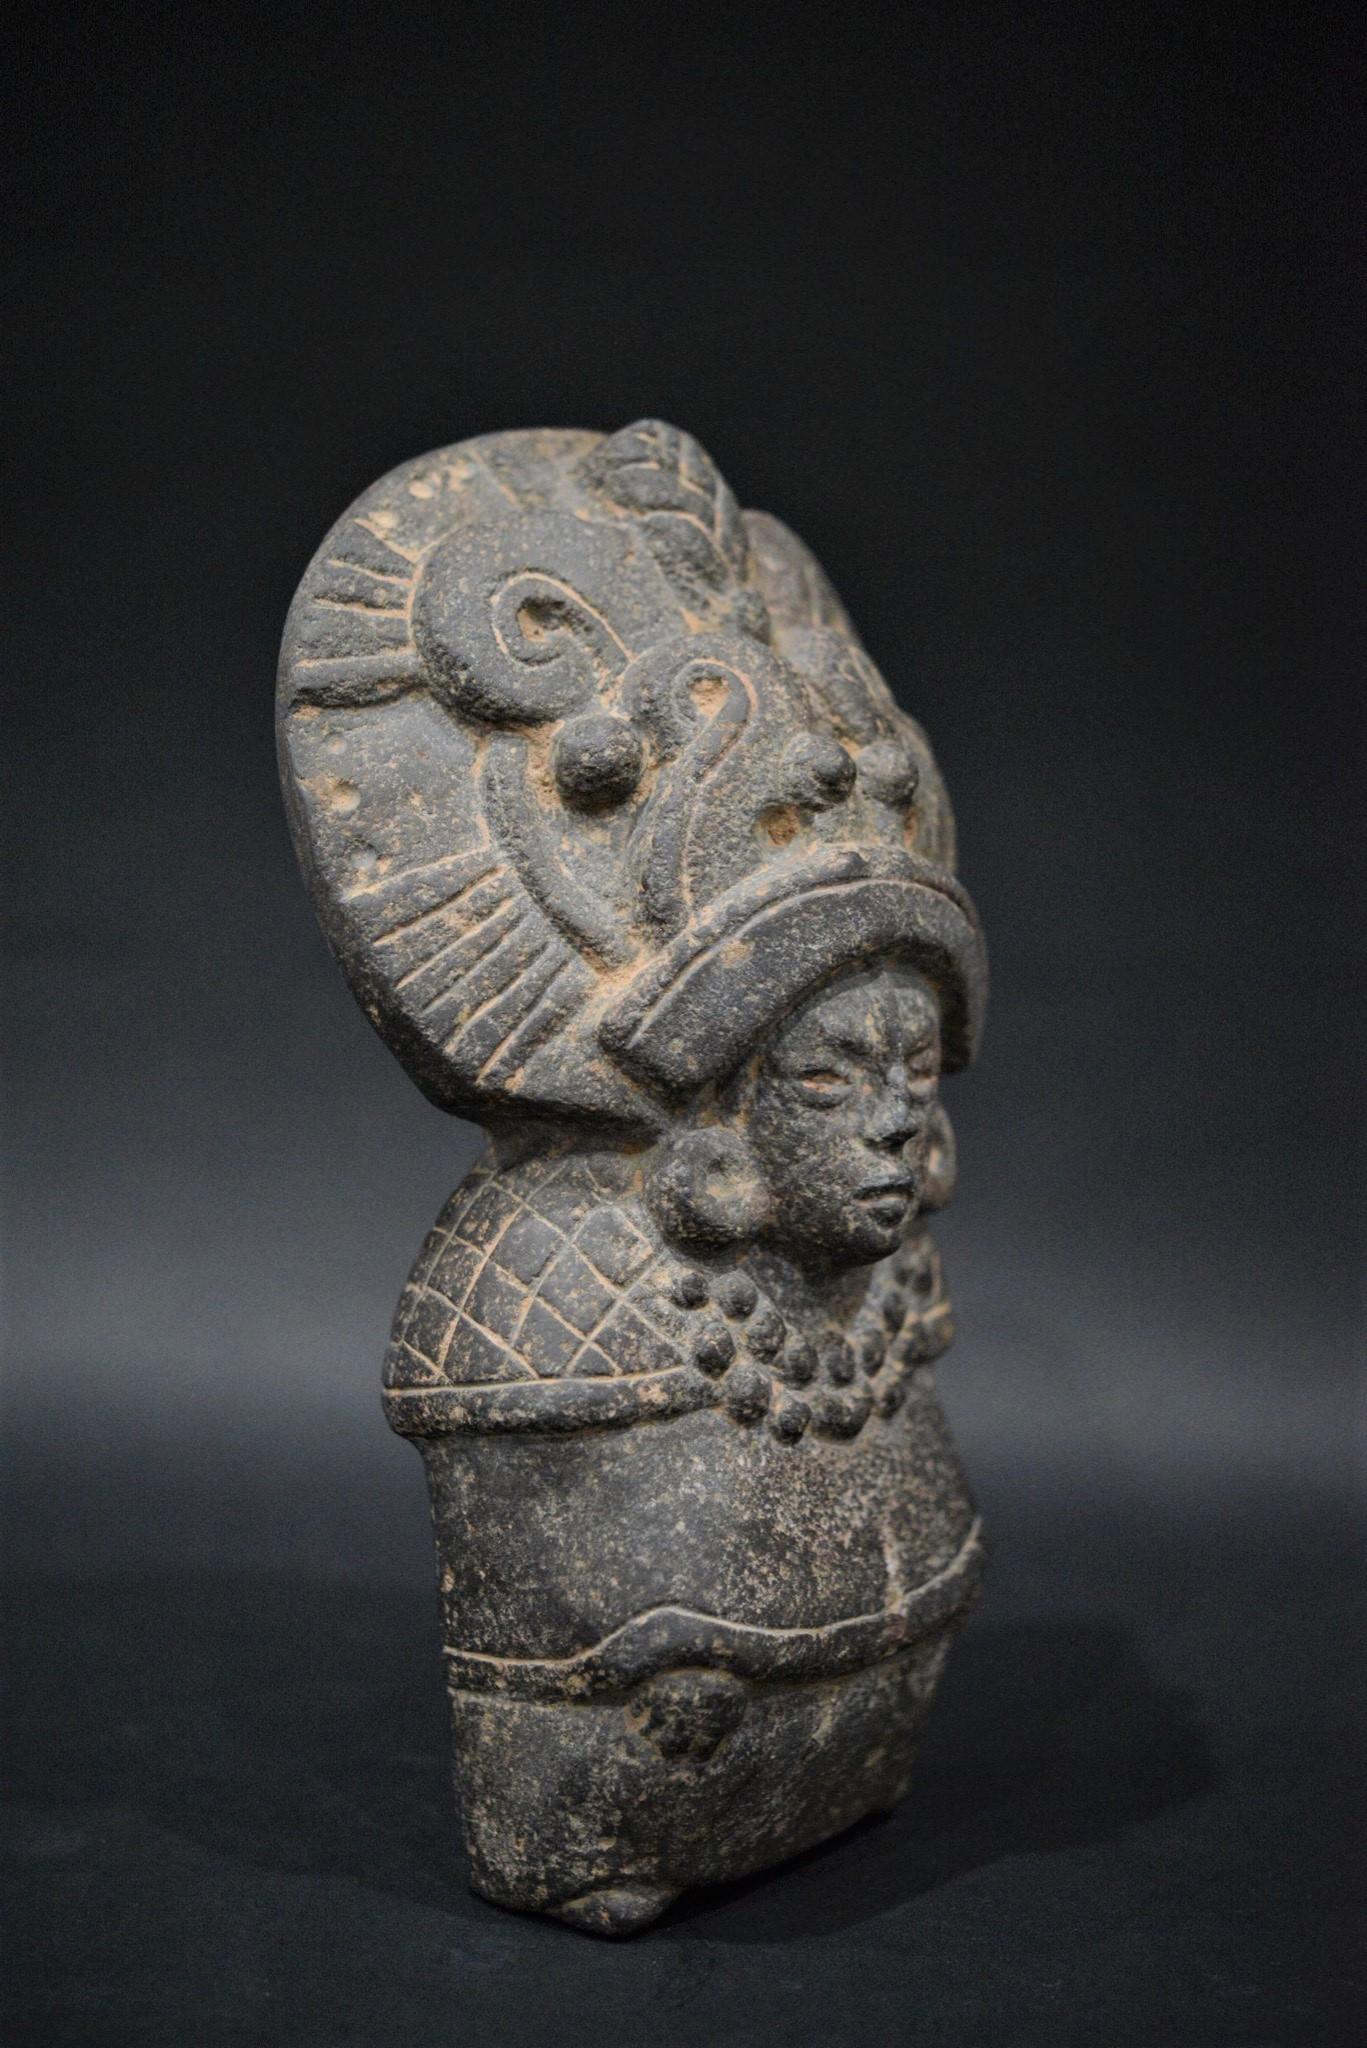 A superb basalt sculpture of an early Maya Goddess, wearing a splendid and oversize headdress, large earflares, and a beaded necklace with a pendant(surely jade).

Her shoulders are covered with a checkered shawl (Quechquemitl), her hands are